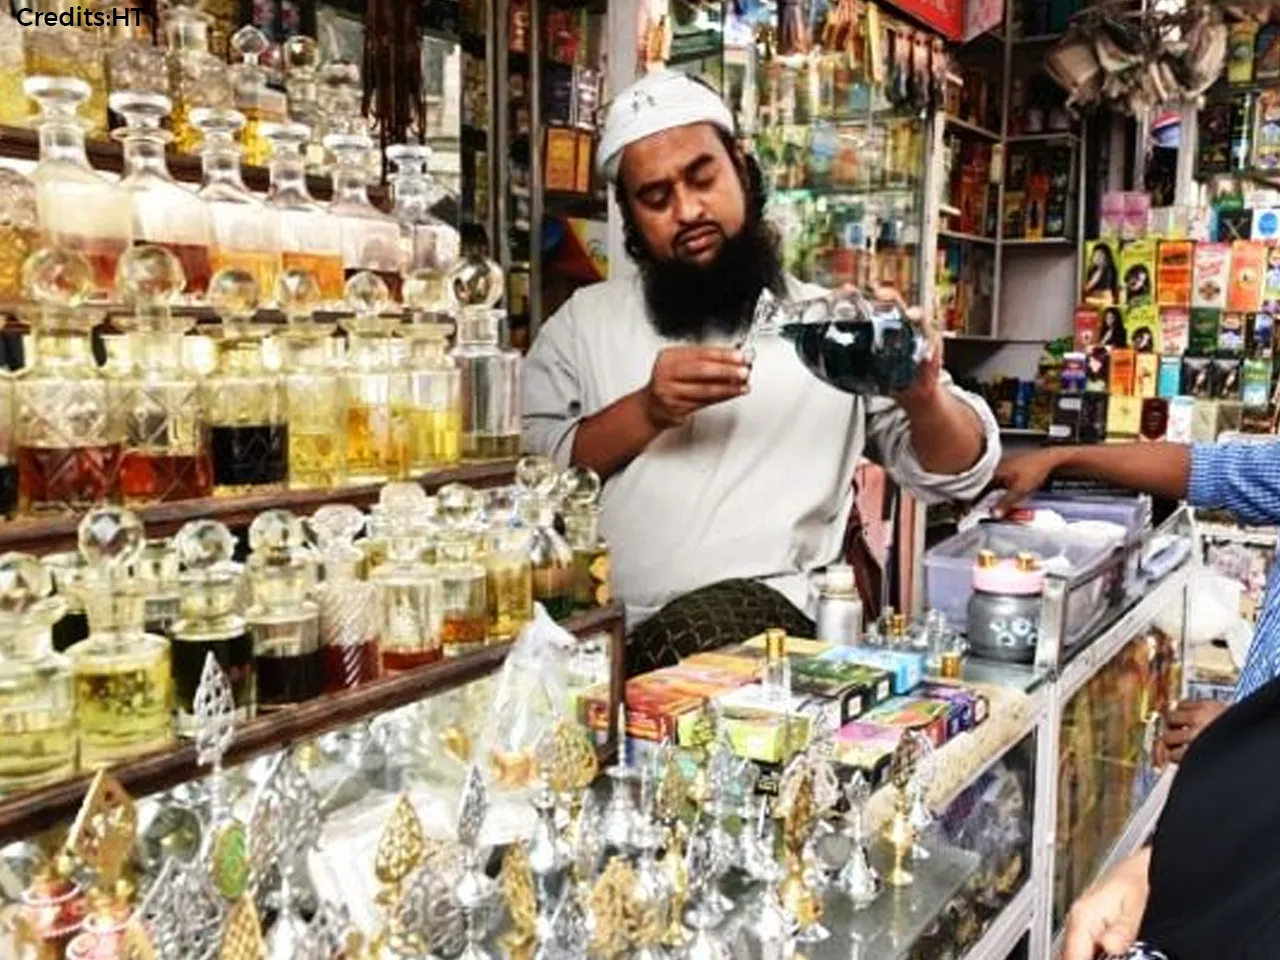 Scented Treasures: Walking through the Perfume Market in Hyderabad